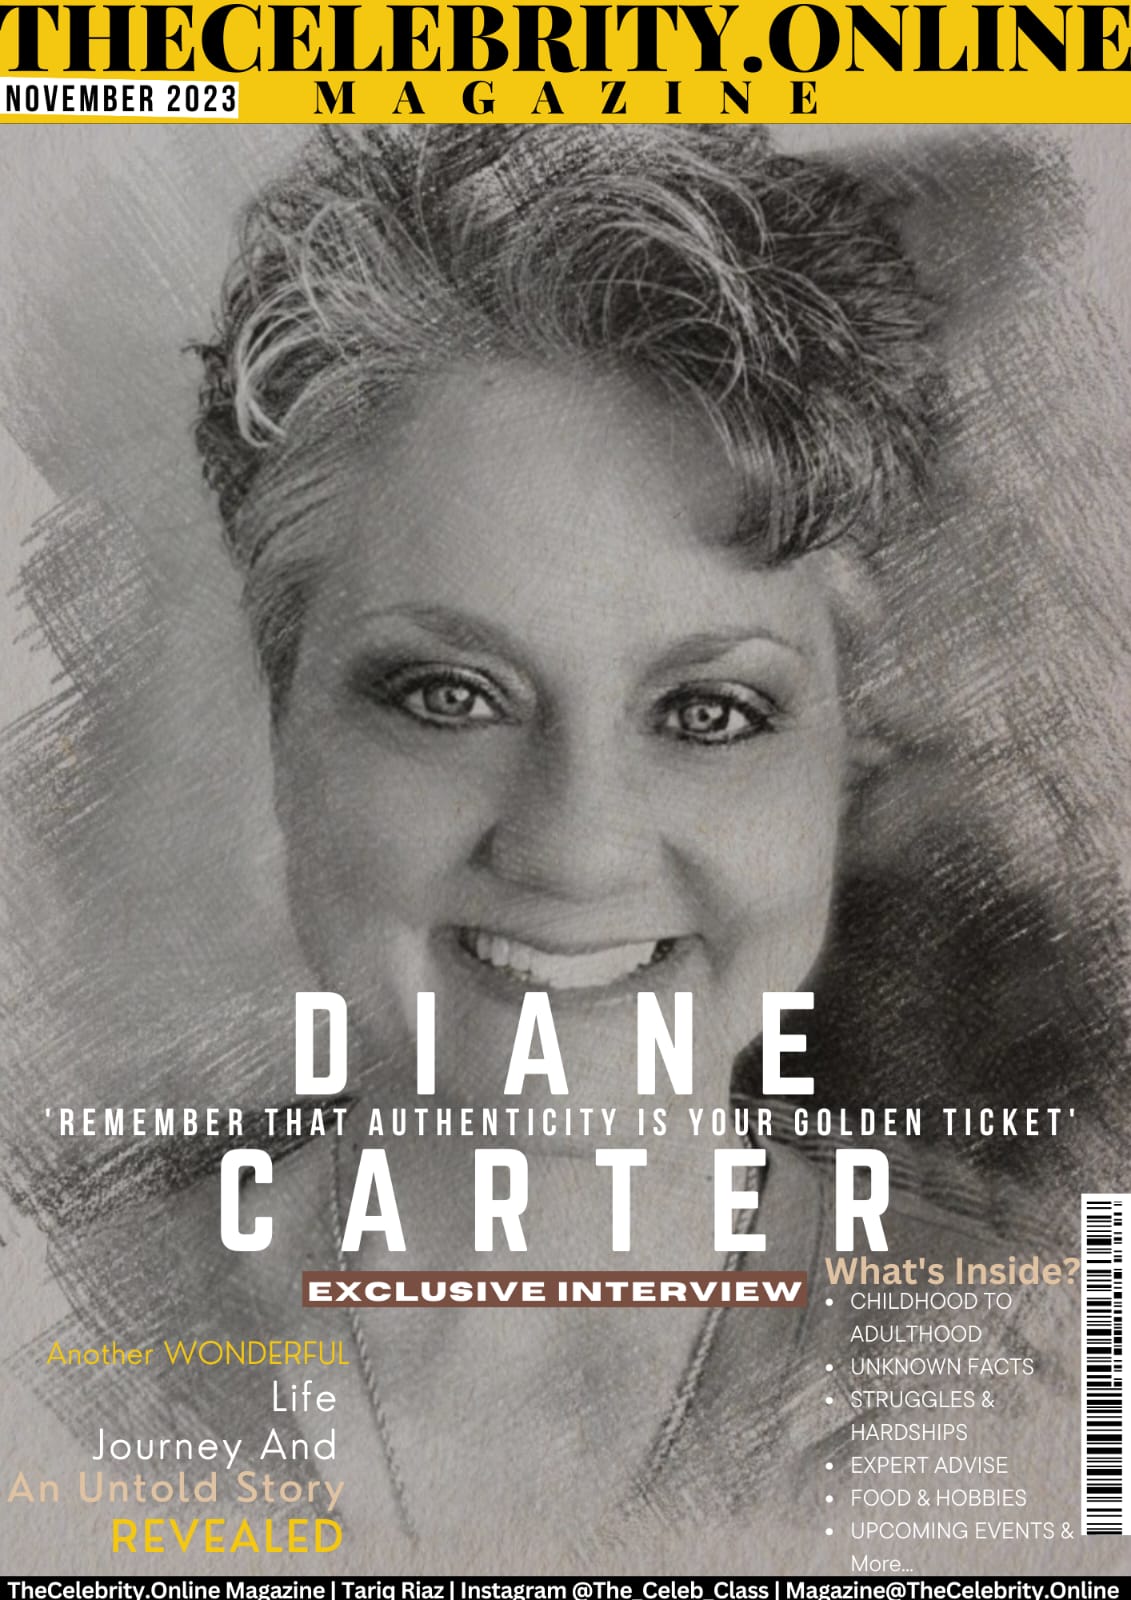 Diane Carter Exclusive Interview – ‘Authenticity Is Your Golden Ticket’